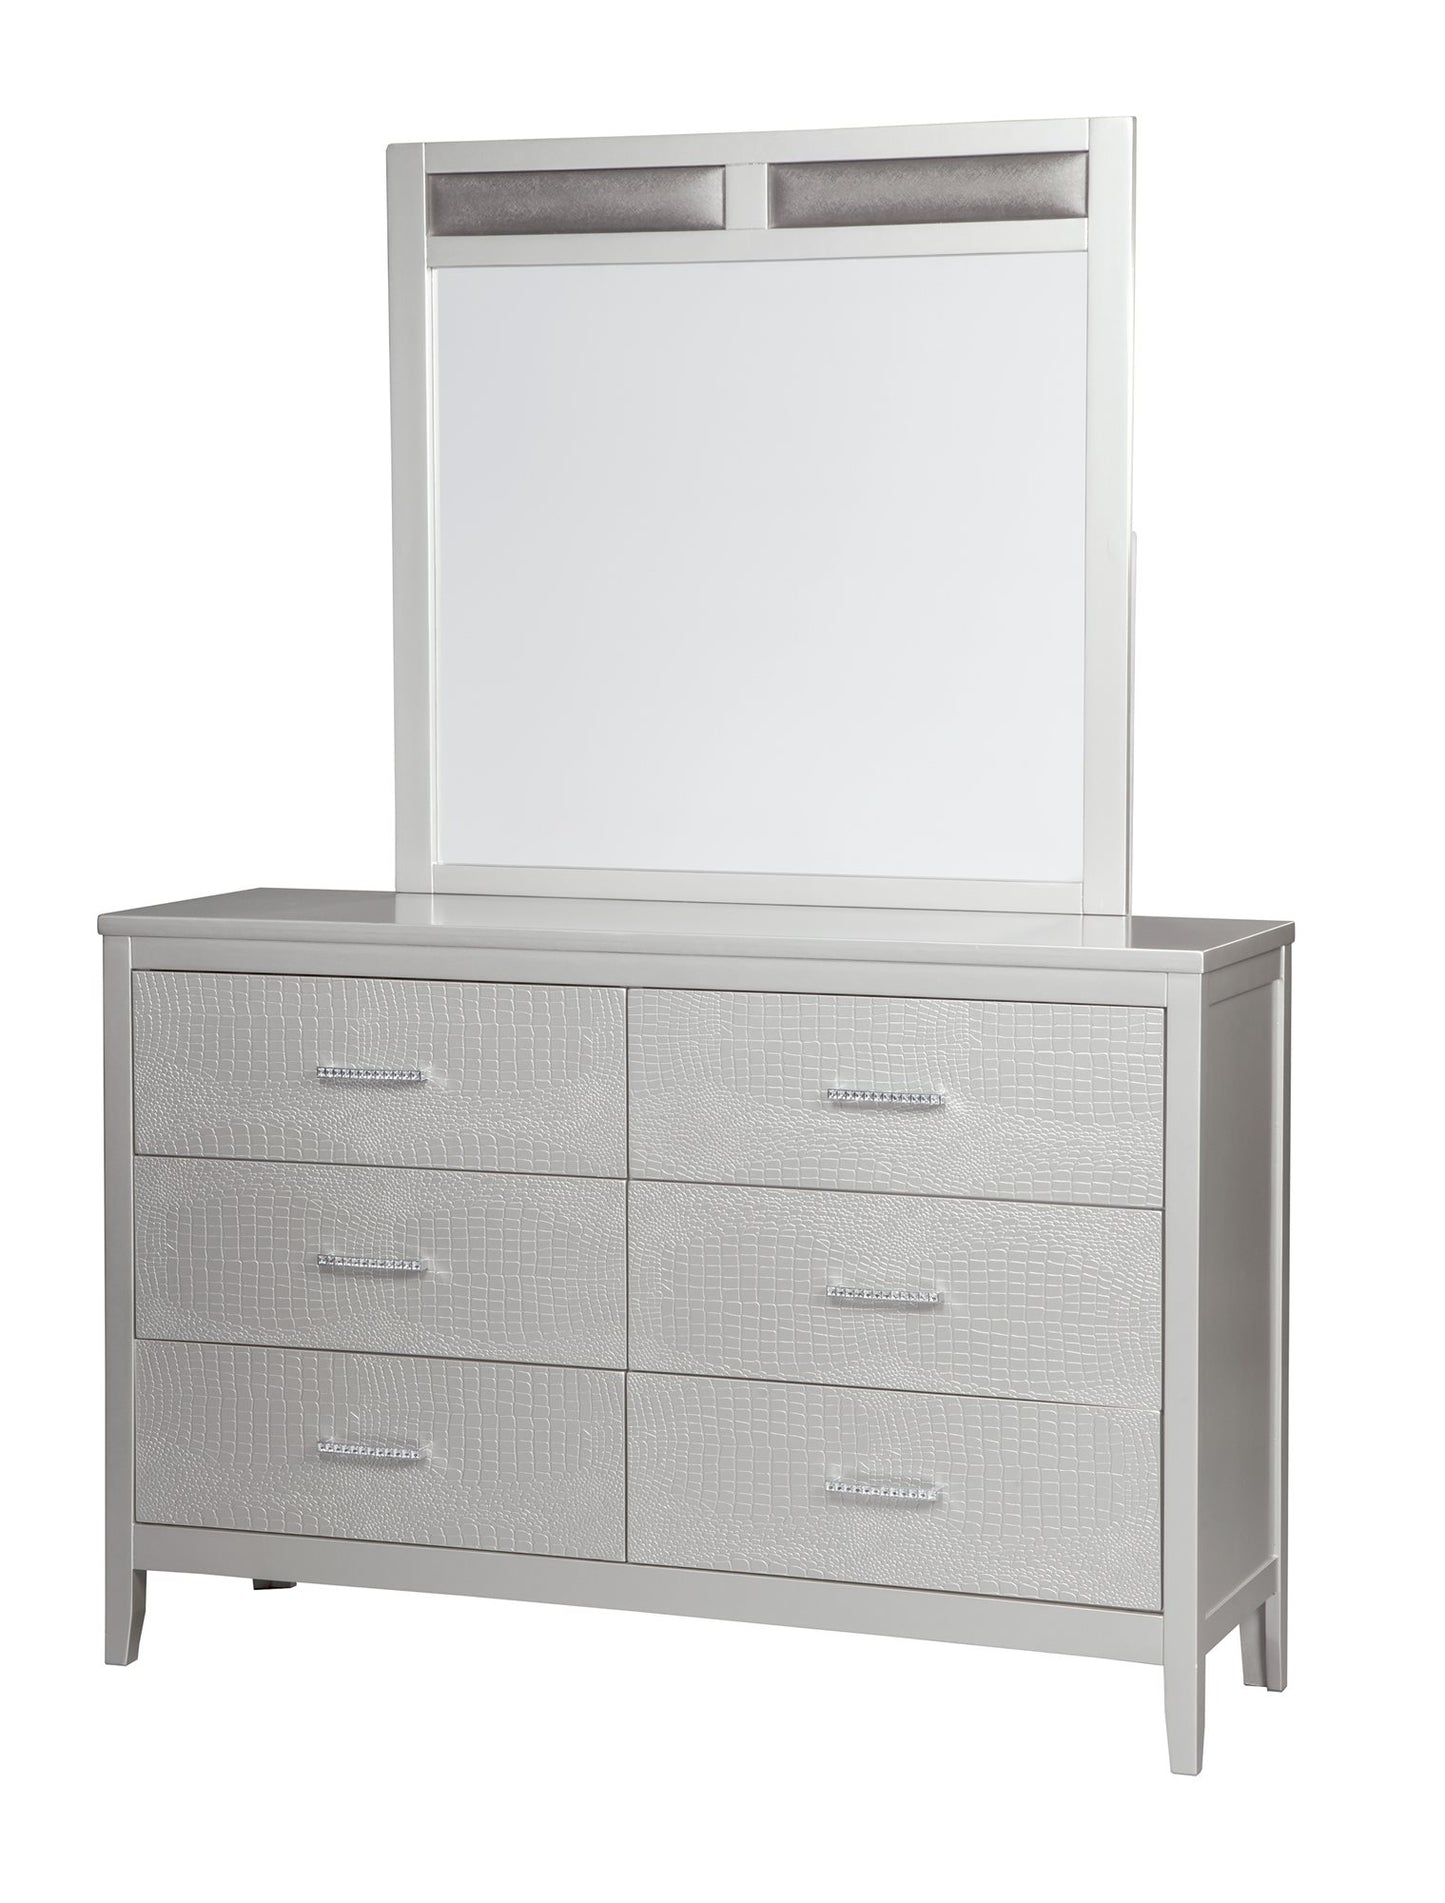 Ashley Olivet 5PC Bedroom Set E King Panel Bed Two Nightstand Dresser Mirror in Silver